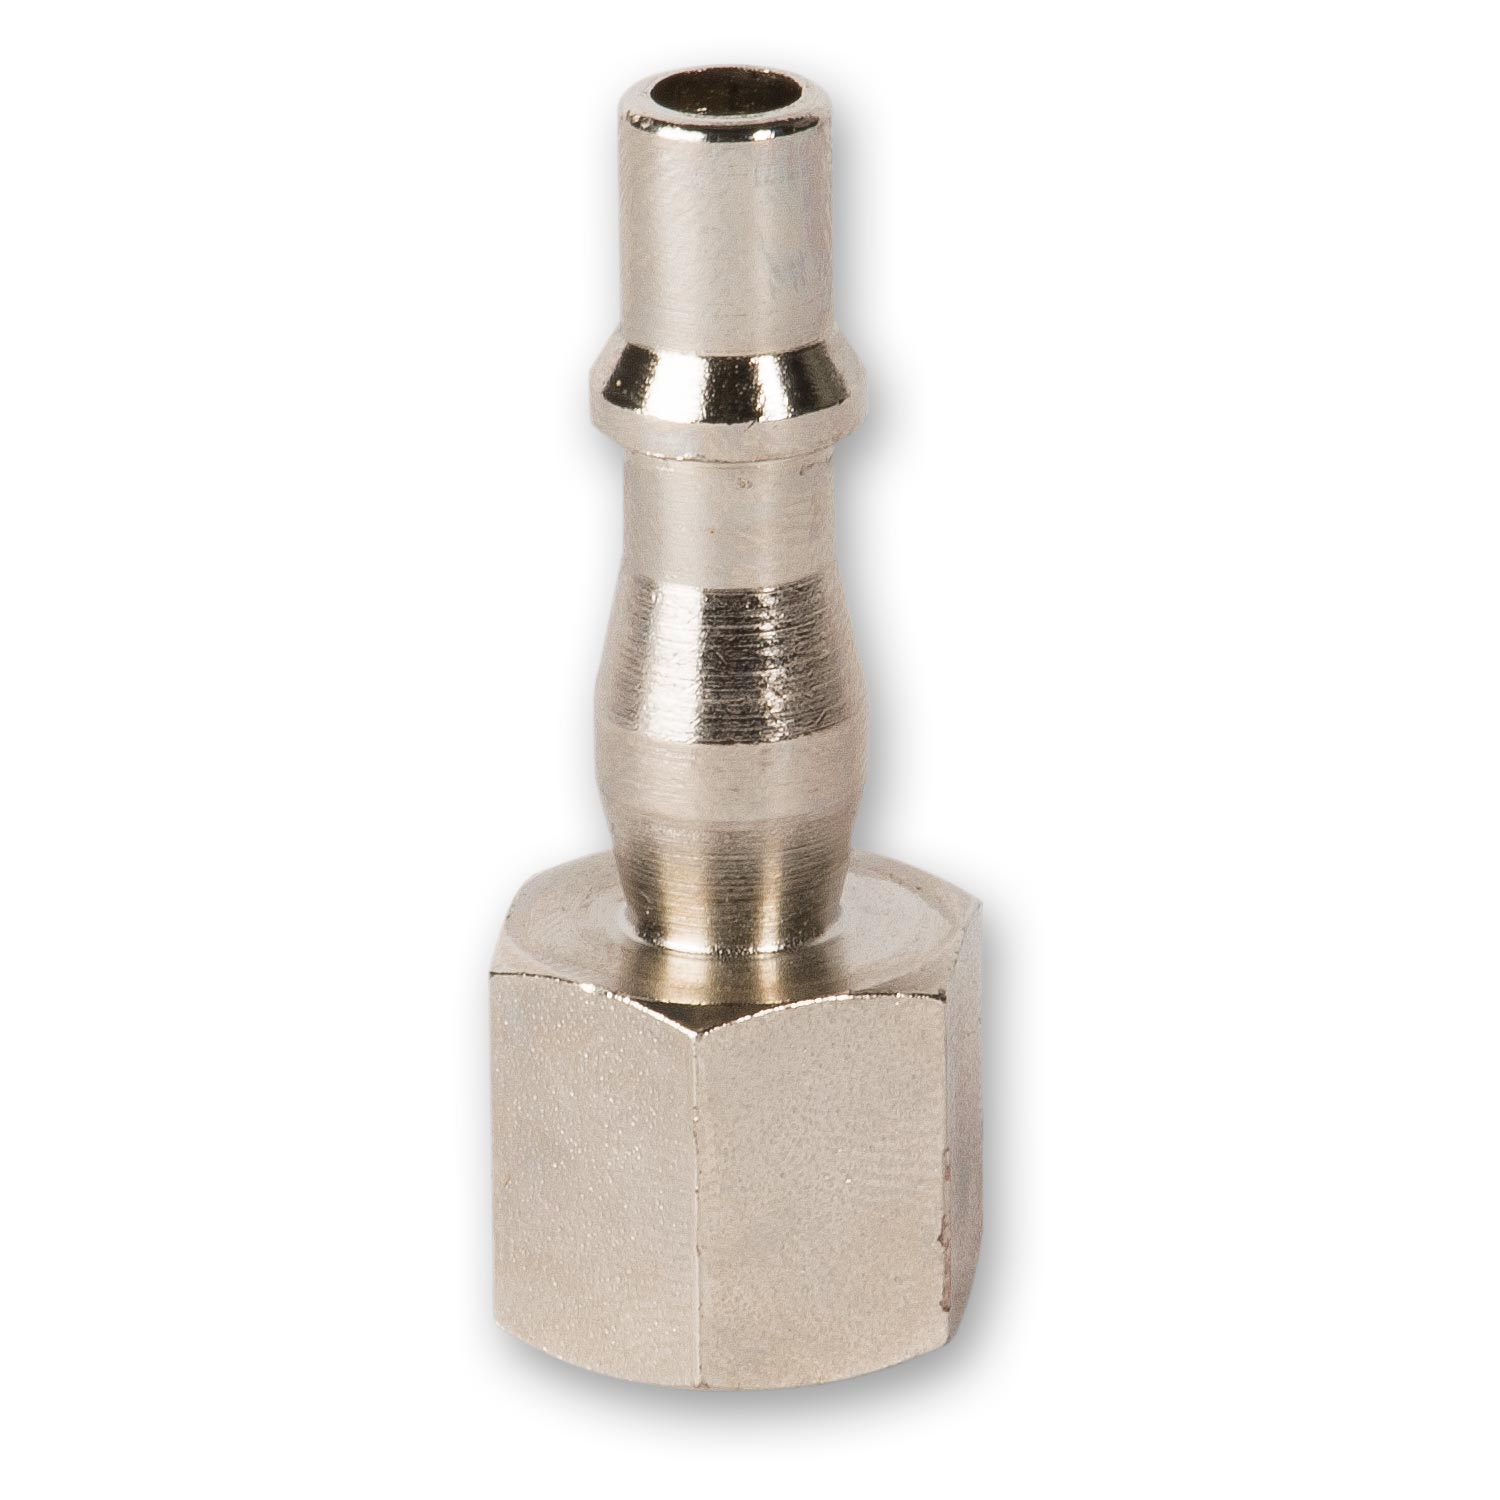 Axminster Professional 1/4"BSPT Female Bayonet Air Line Fitting